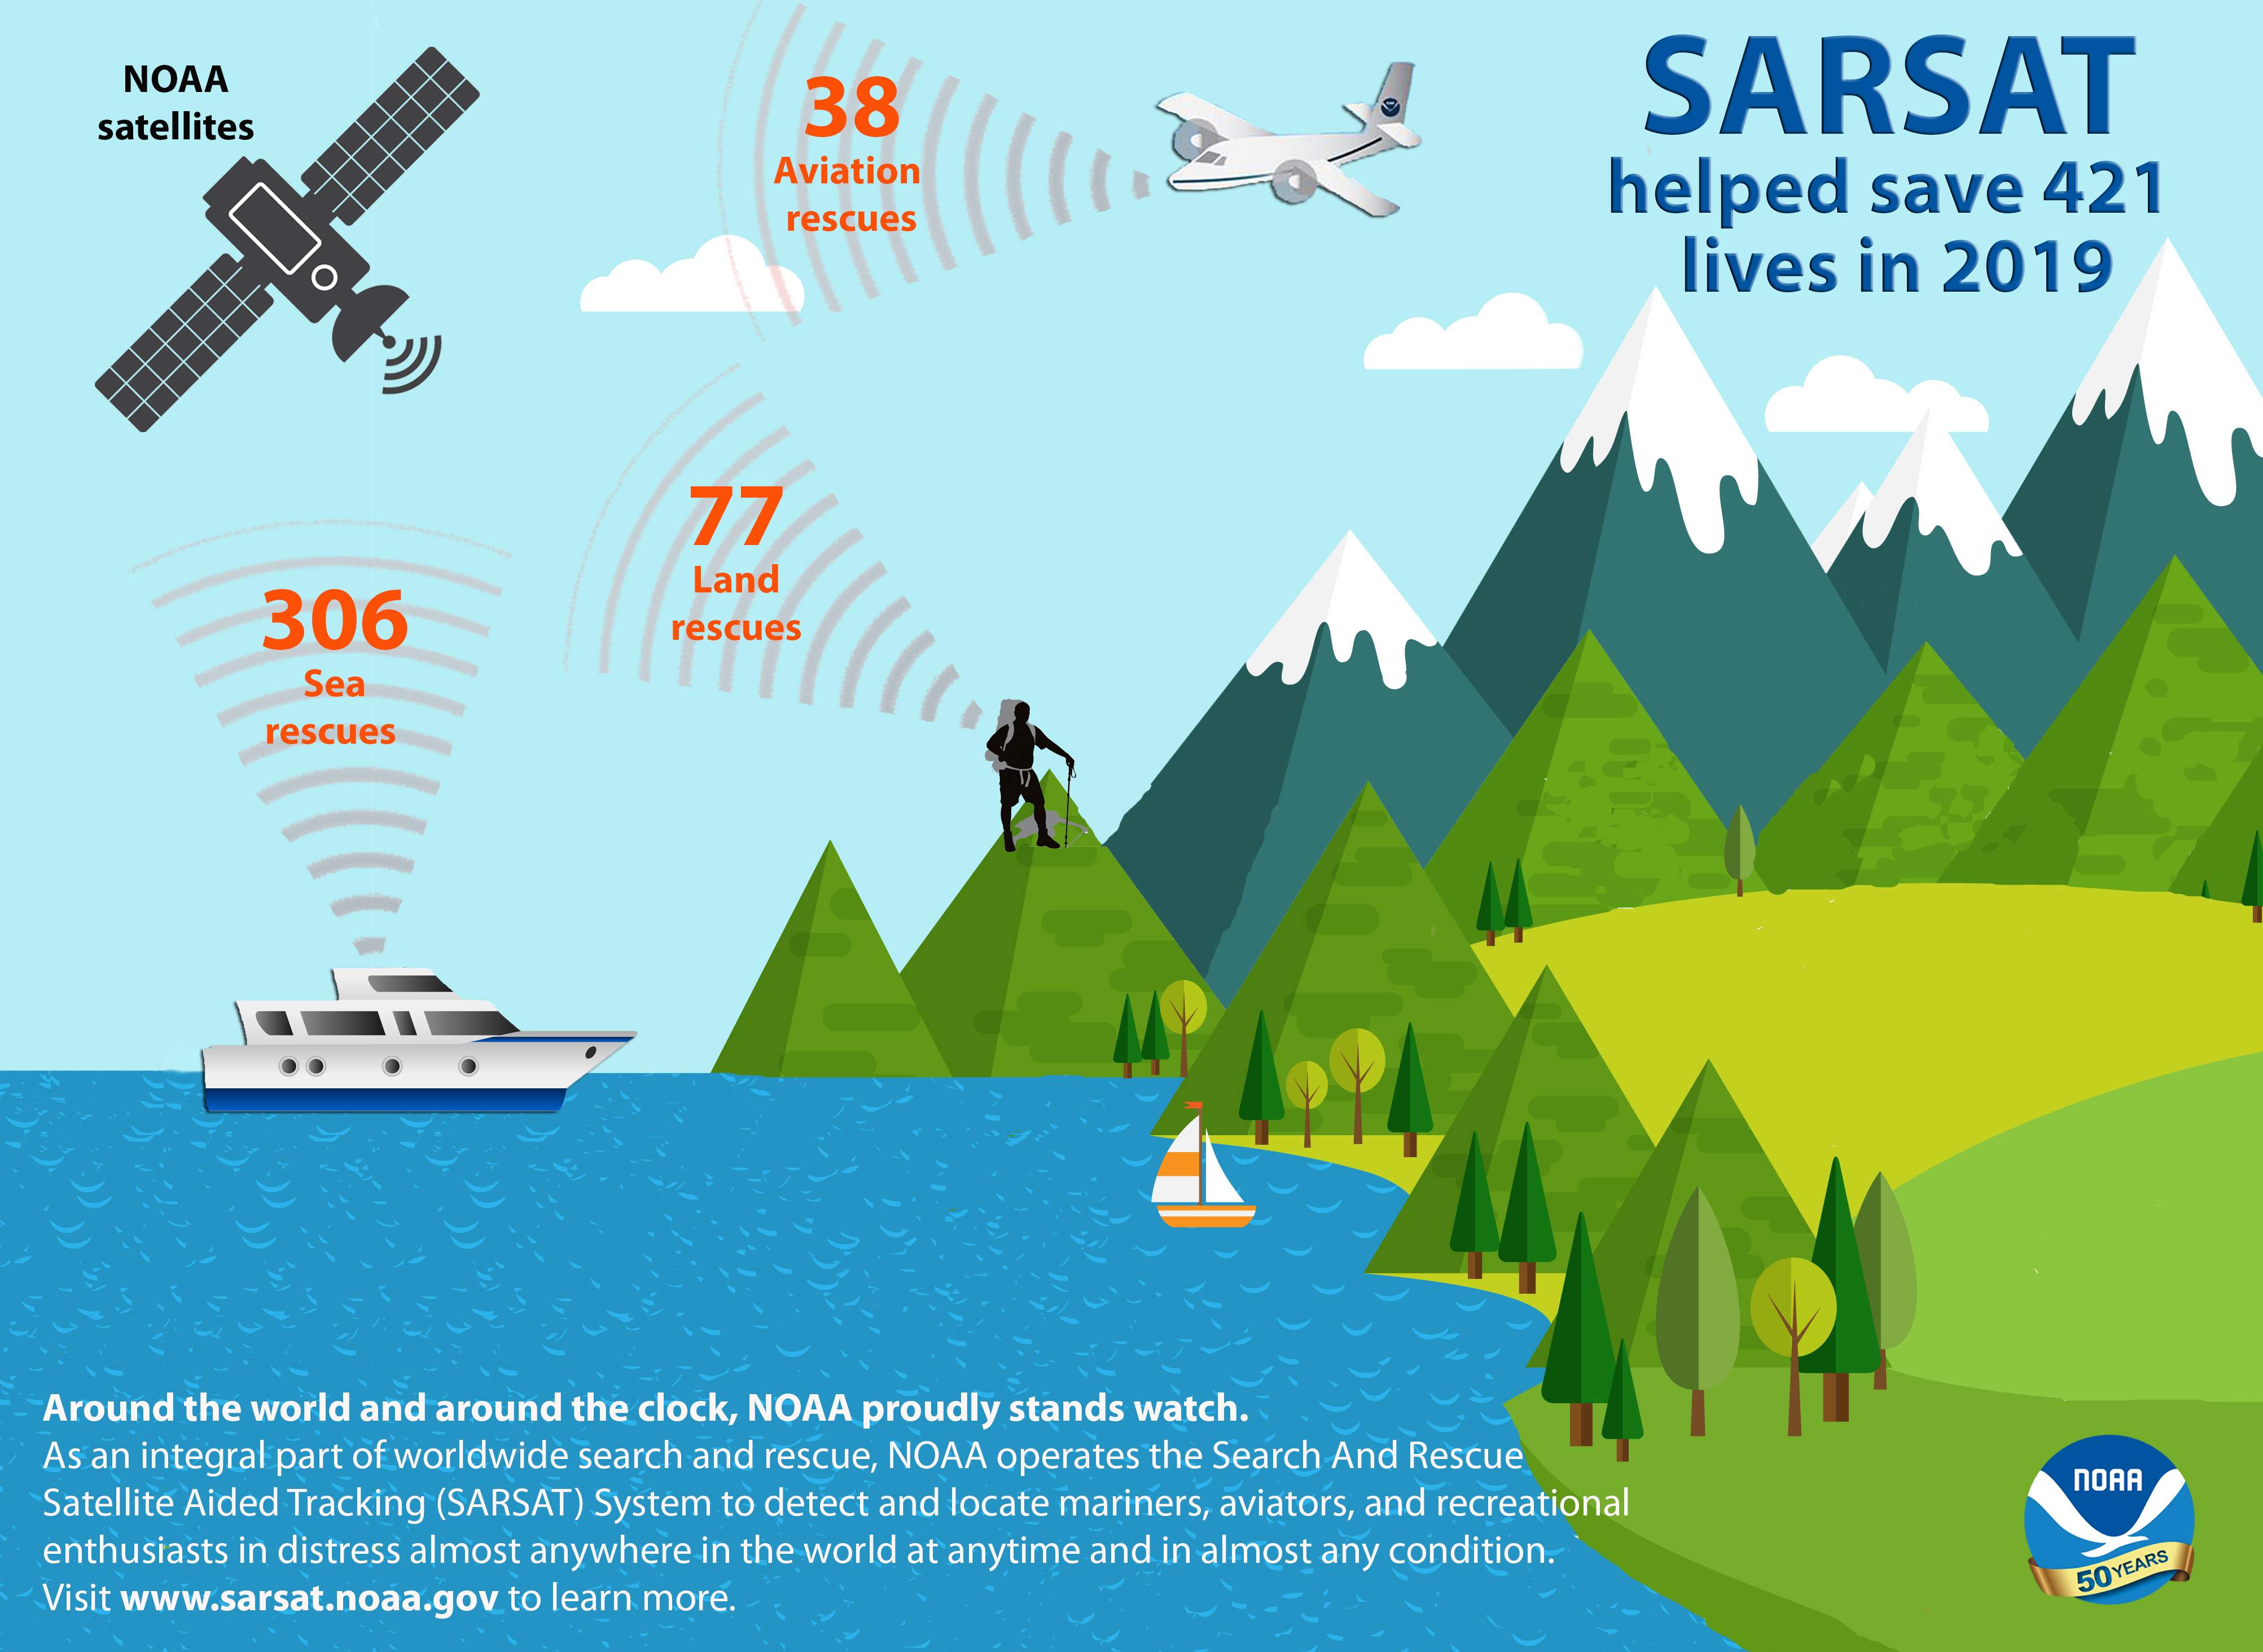 A graphic showing 3 categories of satellite-assisted rescues that took place in 2019: Of the 421 rescues that year, 306 were water rescues, 38 were from aviation incidents and 77 were from events on land.